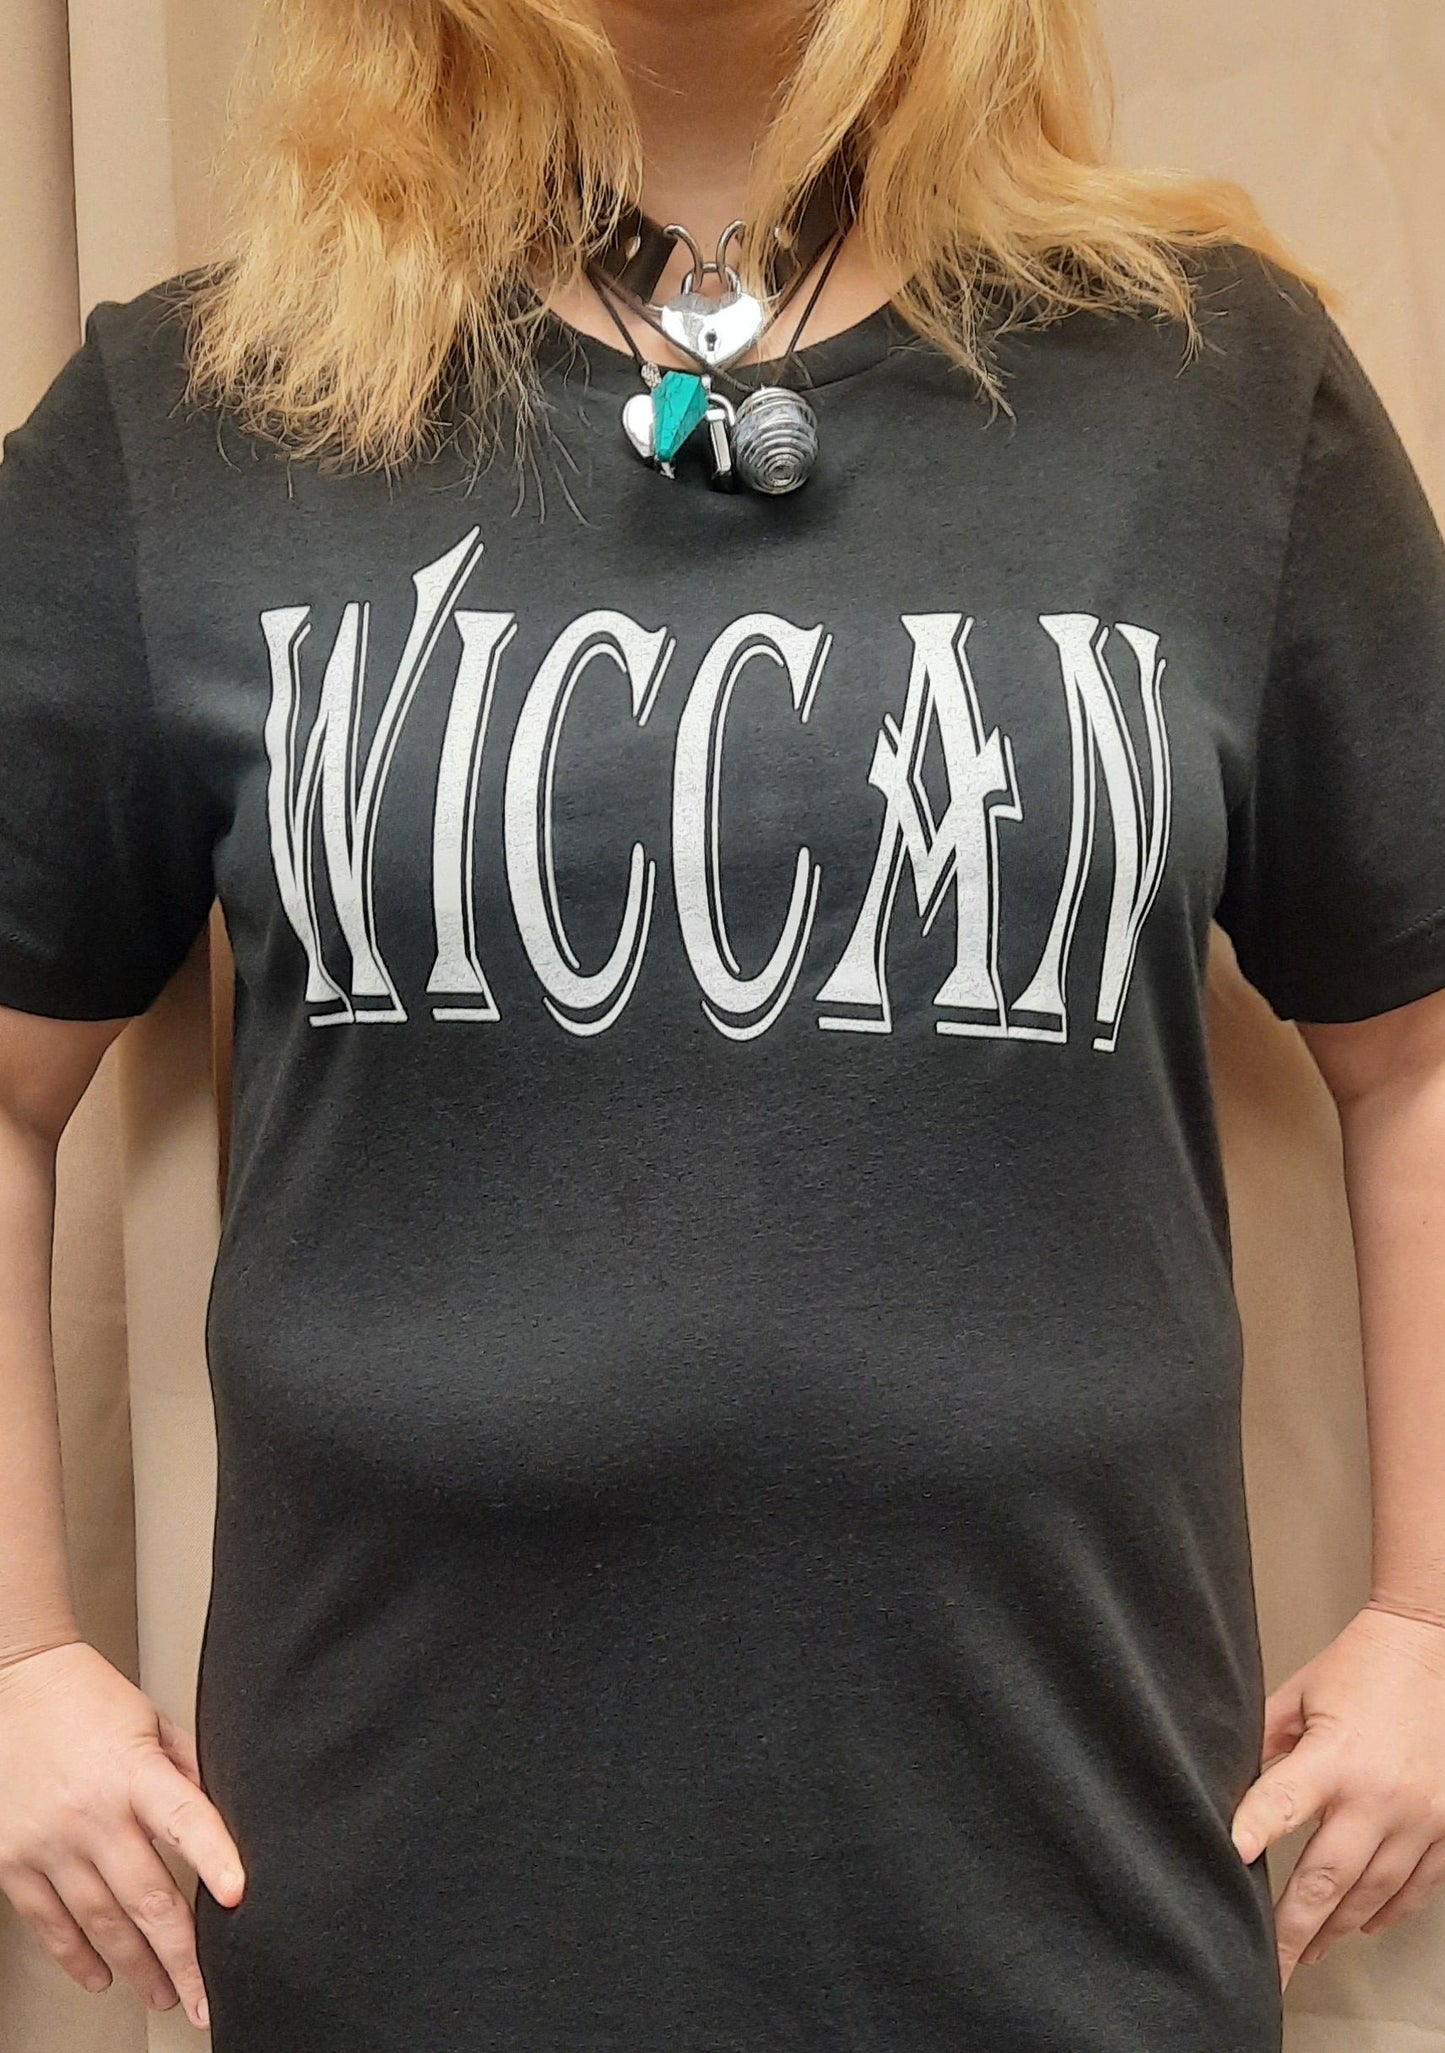 Bella Canvas short sleeve T-Shirt, size XL.  "Wiccan" design on front, Earth, Air, Fire, Water & Spirit design on back.